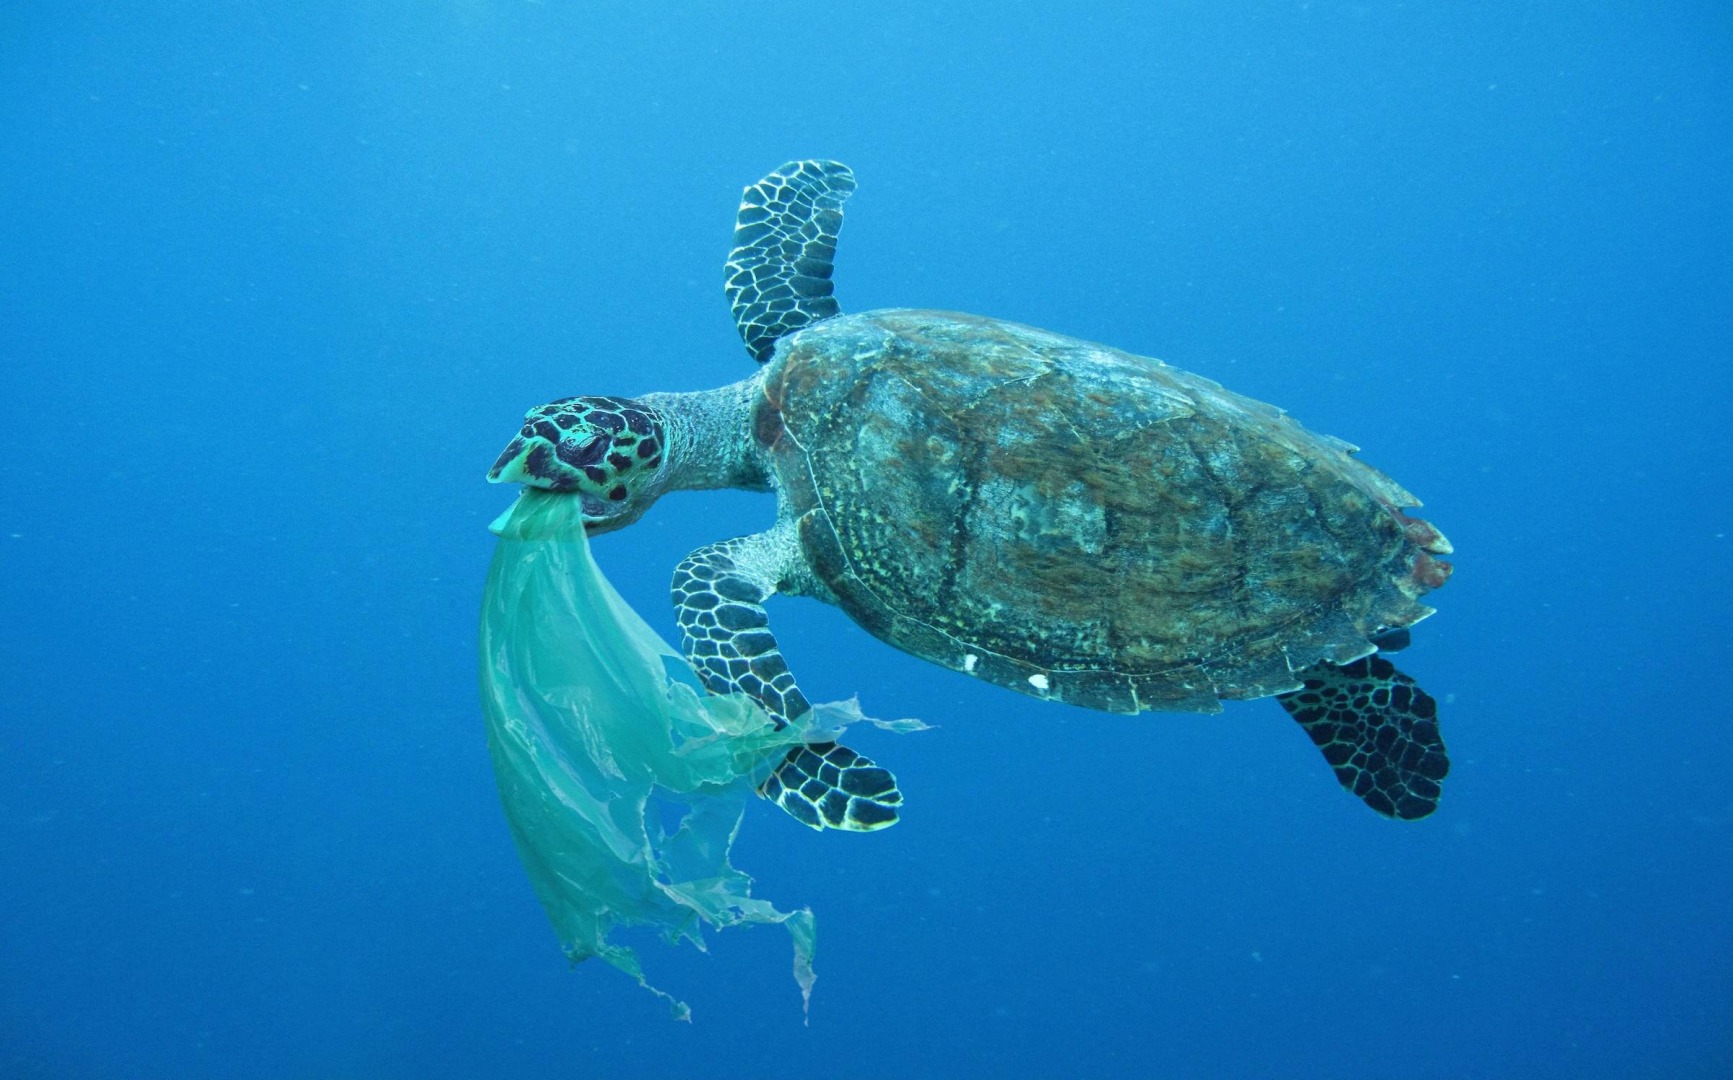 Addressing the Crisis of Plastic Pollution in Marine Ecosystems